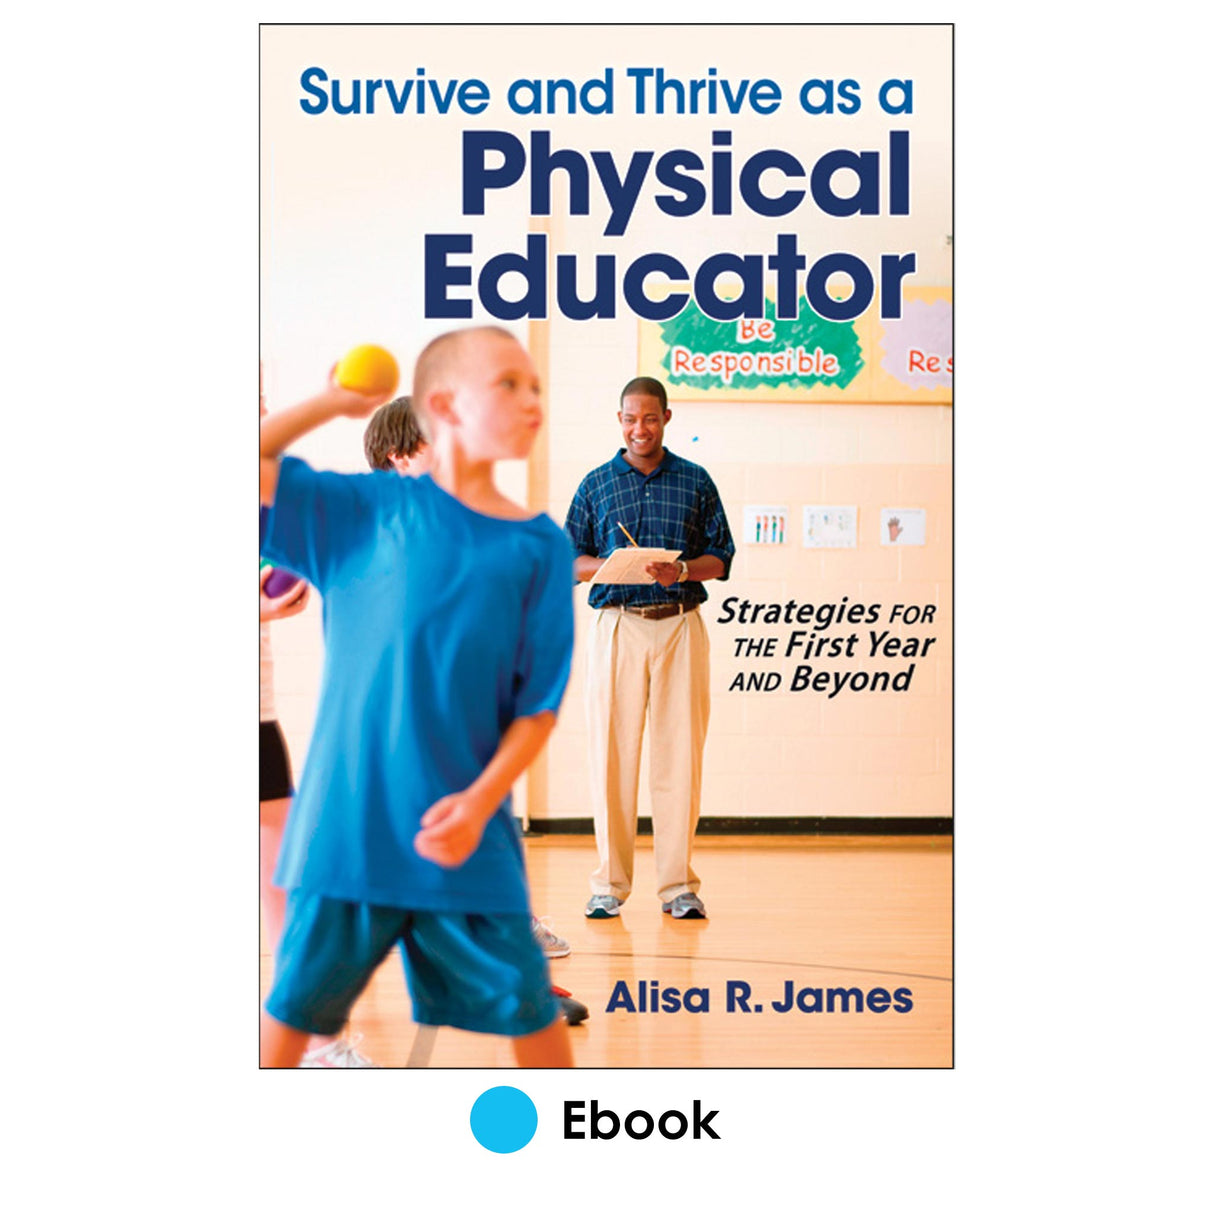 Survive and Thrive as a Physical Educator PDF